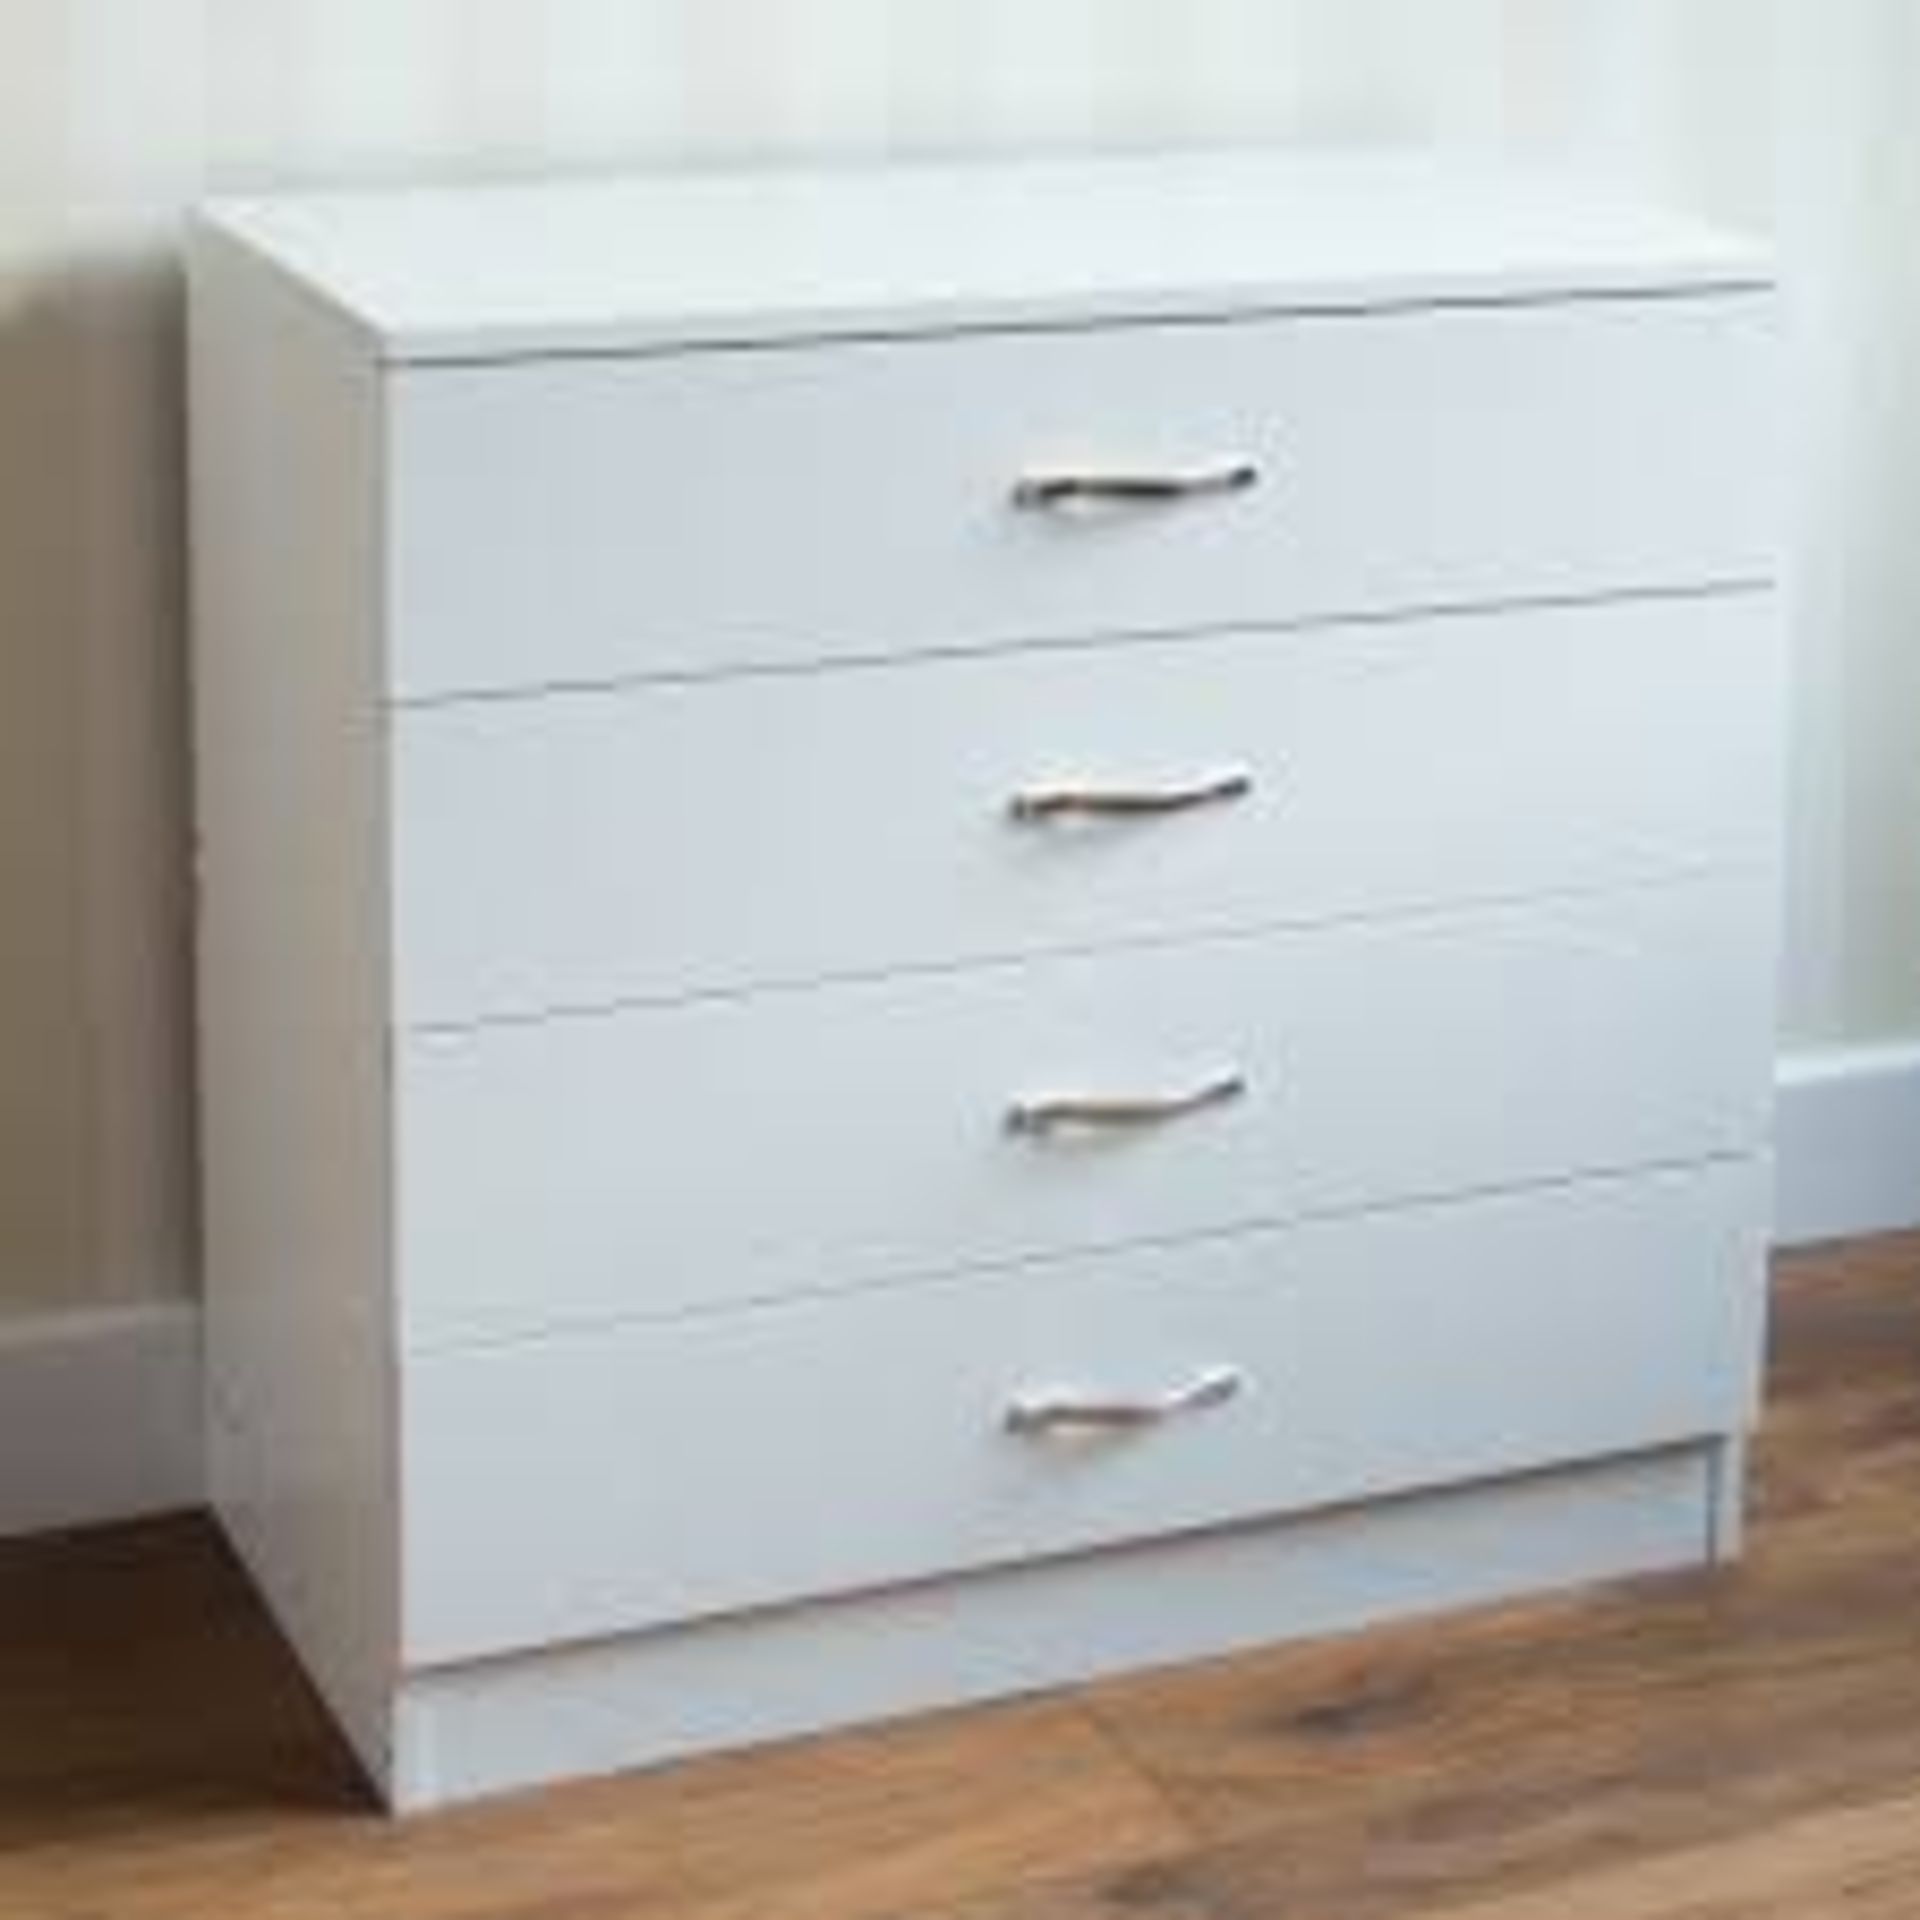 Vida Designs Riano White 4 Drawer Chest (H)720mm (W)750mm (D)360mm. - BI. Offering this stunning new